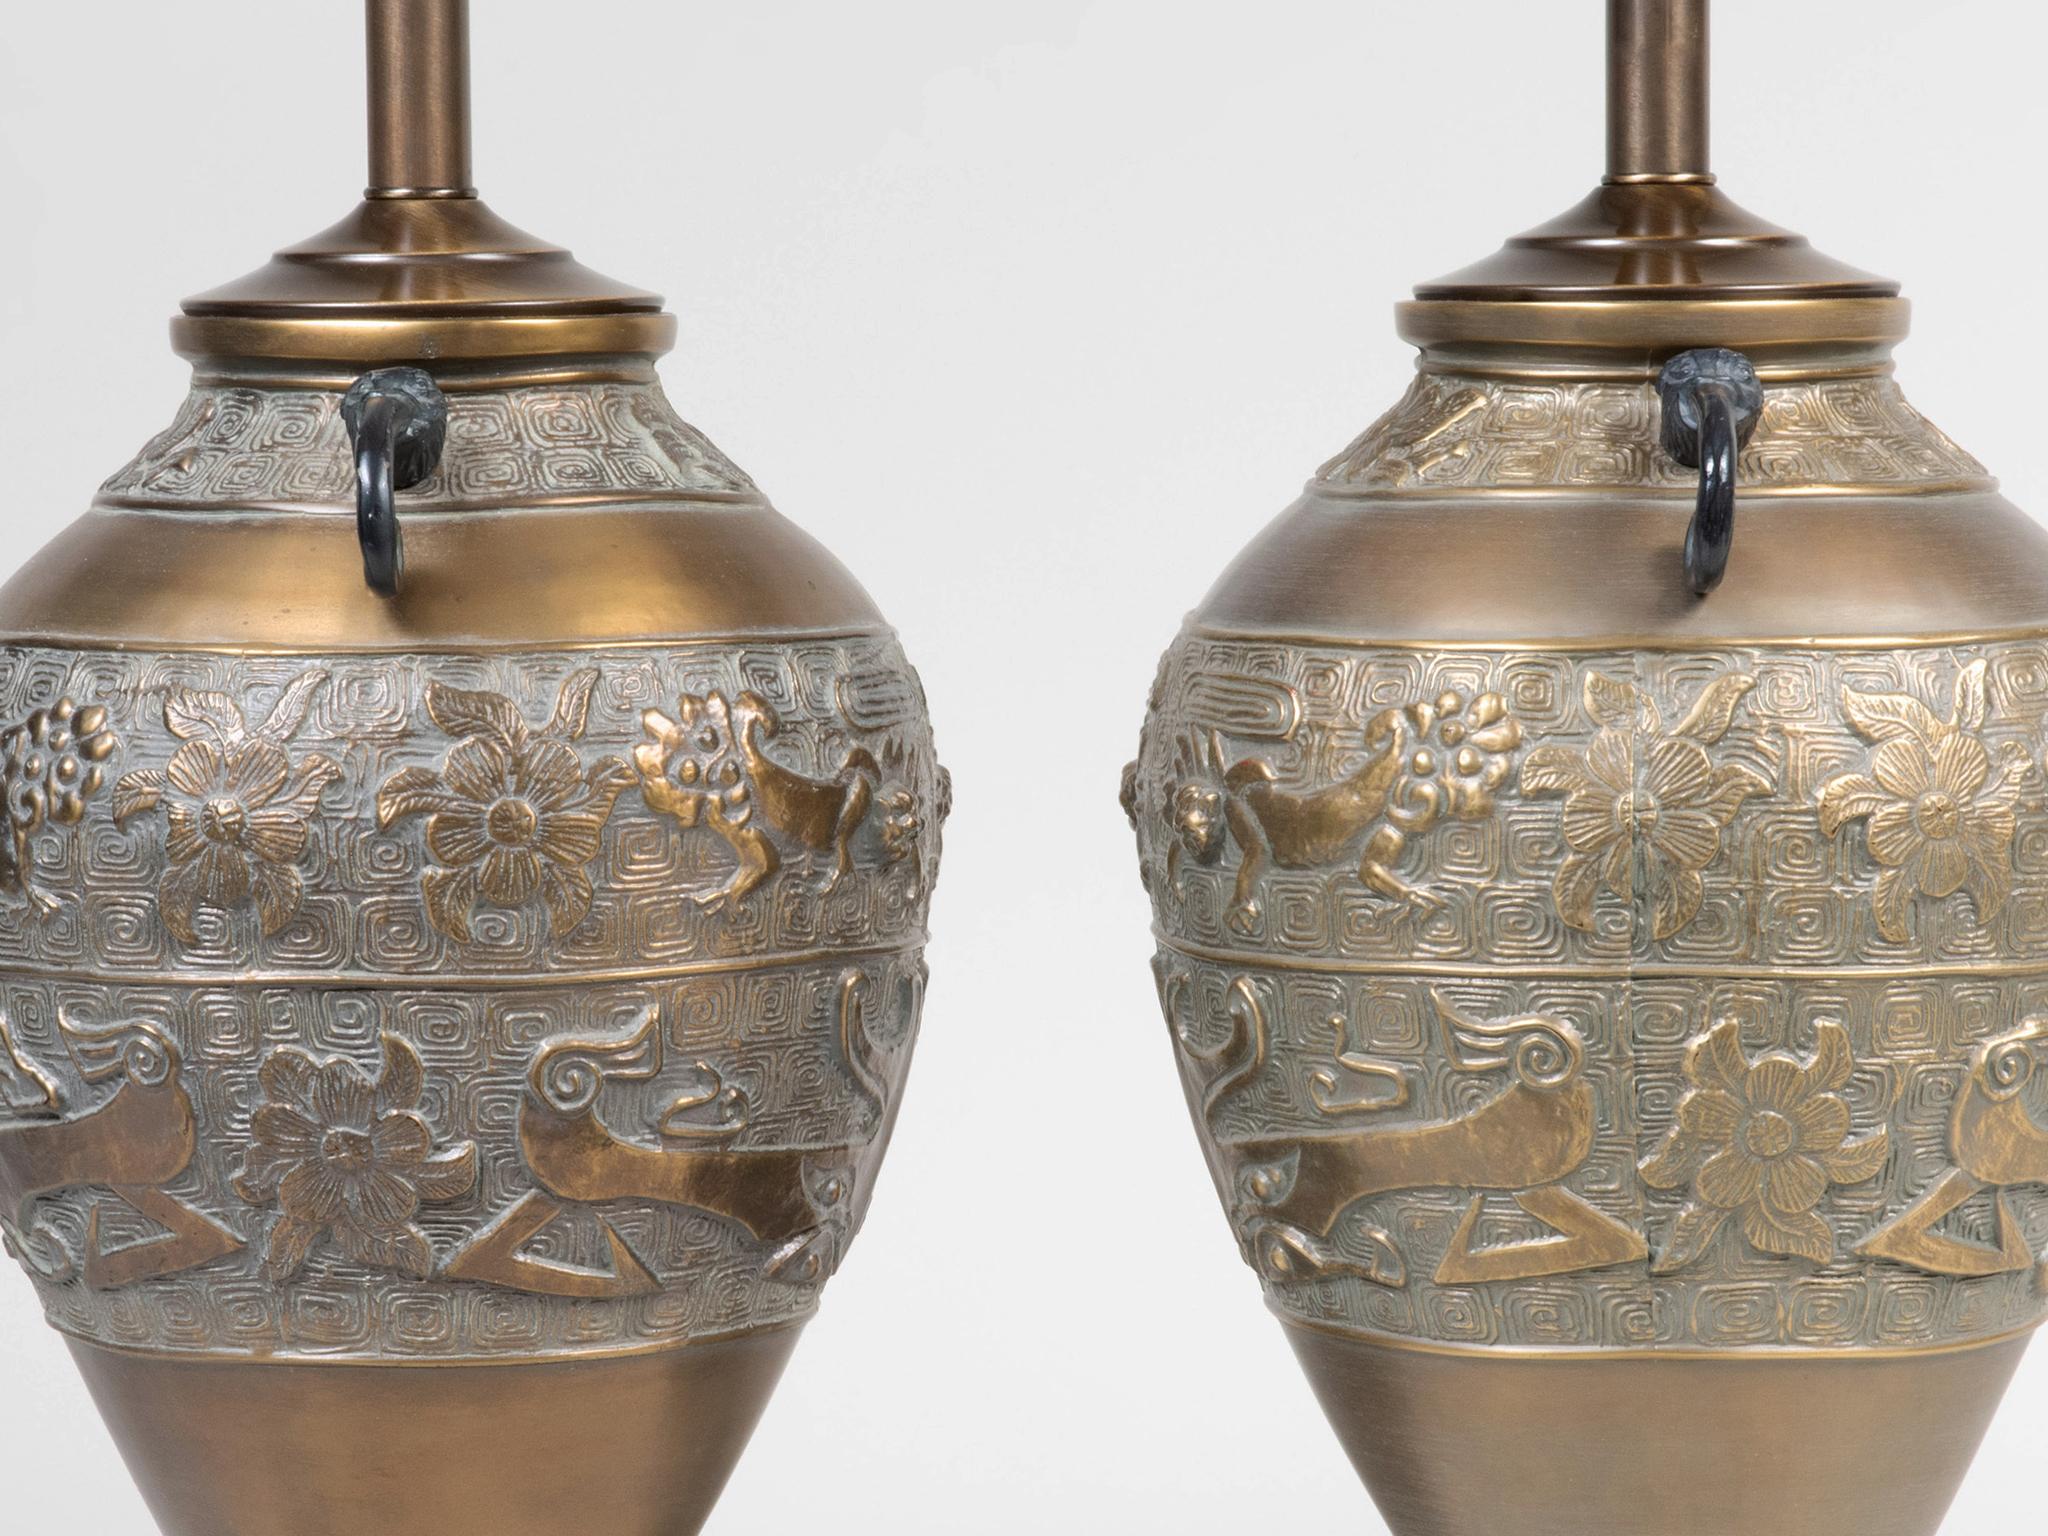 An ornate 20th century pair of table lamps in the manner of James Mont. They are comprised of cast brass bodies, ebonized wood bases, and new custom linen shades. Stylized floral and animal figures adorn the body of the lamps, while the double